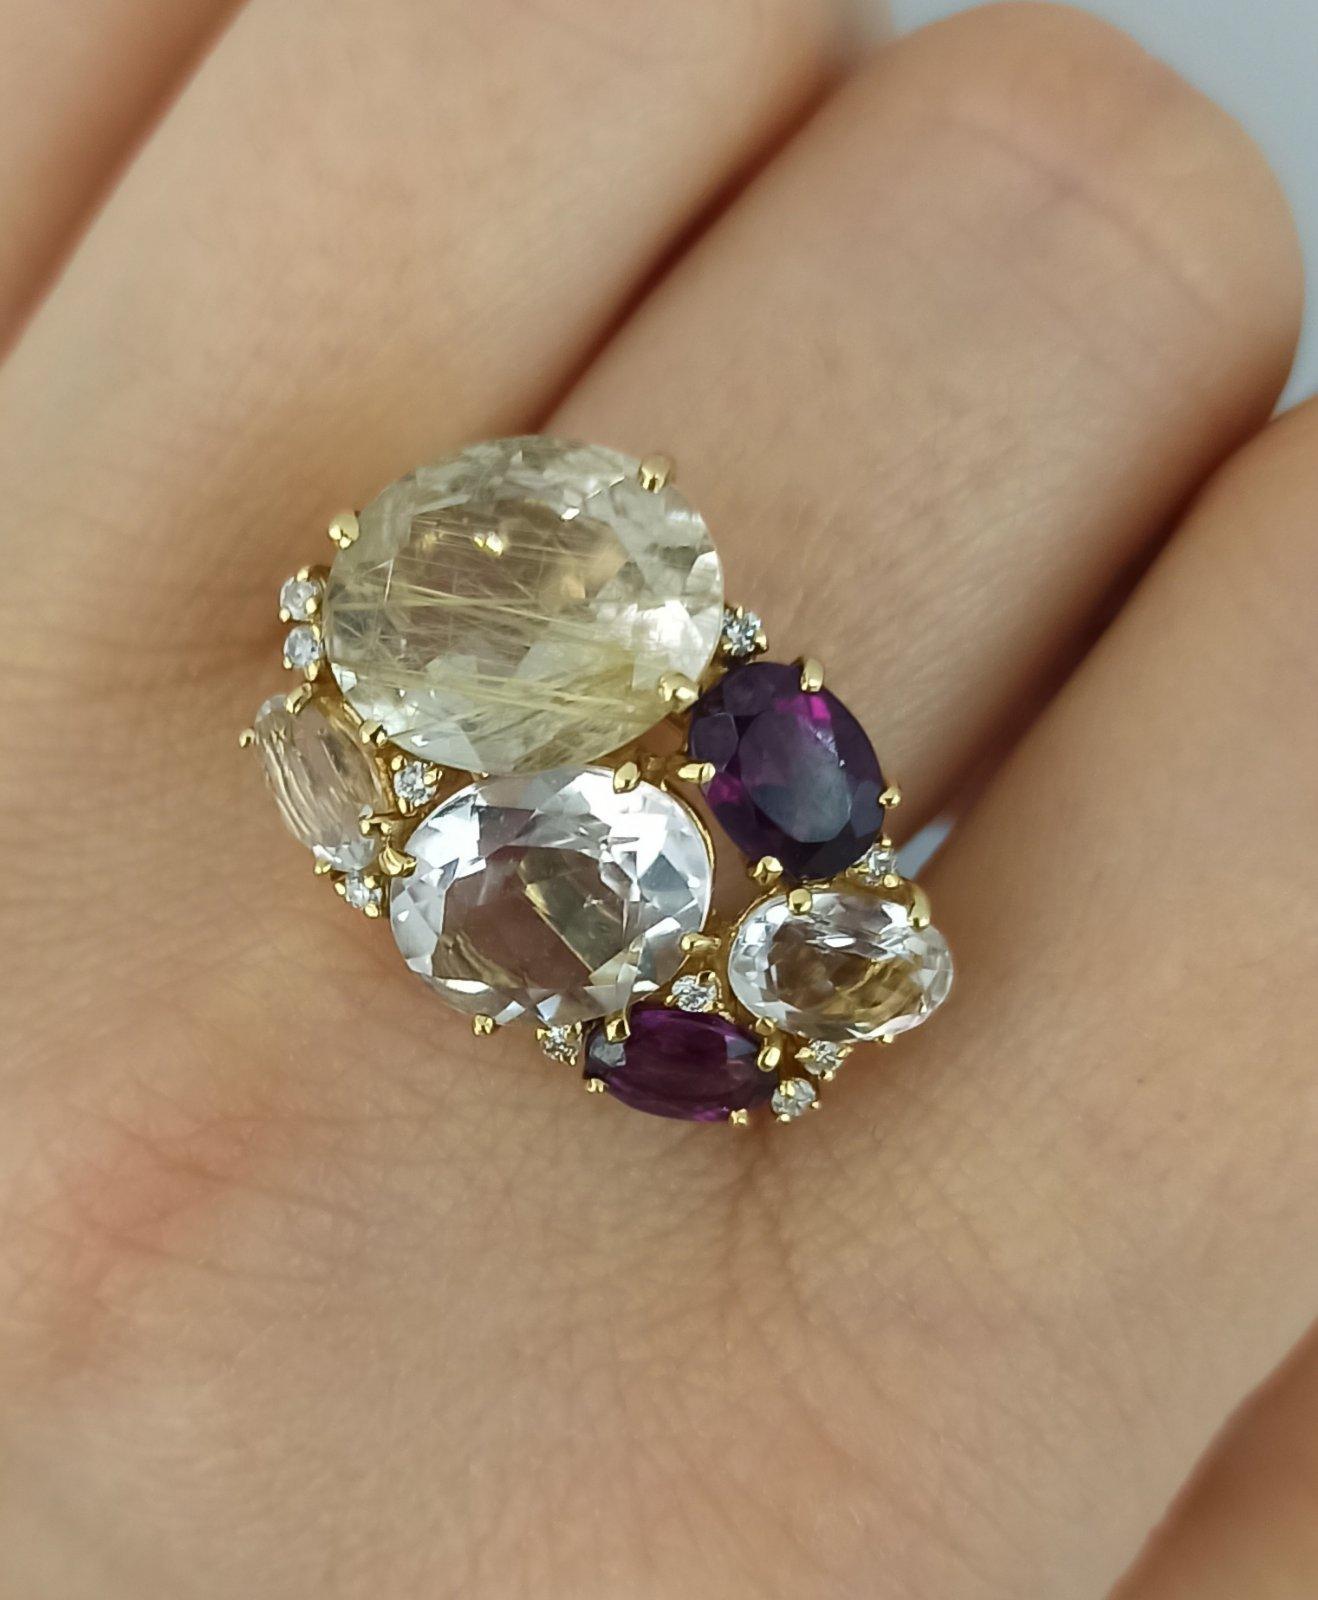 Ring Yellow Gold 18K (Matching Earrings Available) 
Diamond 10-Round 57-0,1-5/6A 
Quartz 1-Oval-4,1 3/1A 
Garnet 2-Oval-1,1 2/3A 
Quartz 2-Oval-1,1 3/1A 
Quartz 1-Oval-4,1 3/1A
Weight 6,79 gram
Size 17,2

With a heritage of ancient fine Swiss